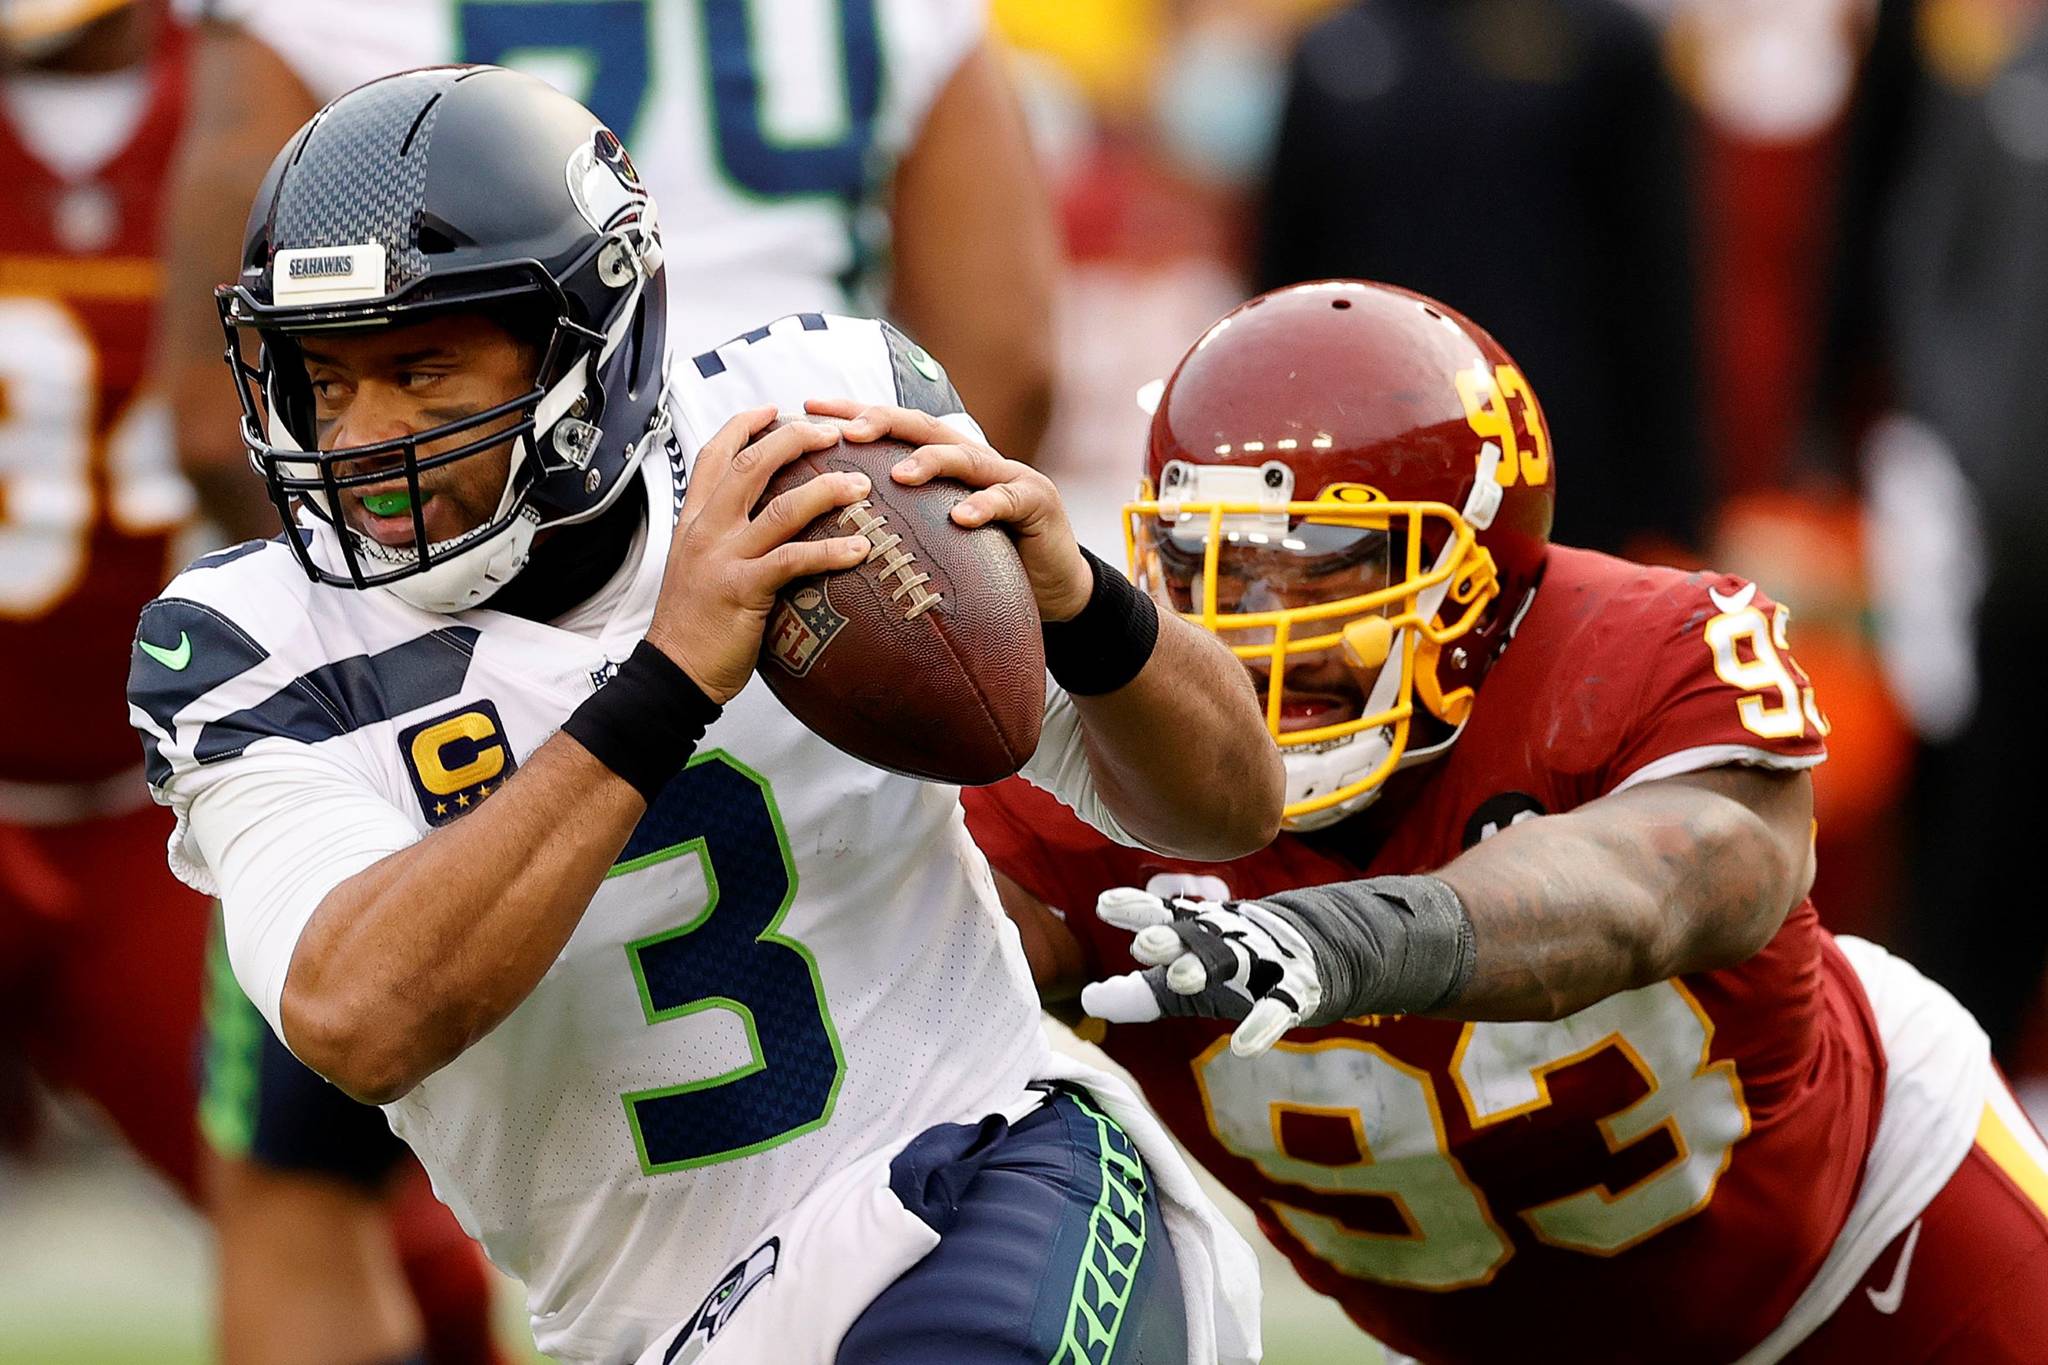 Tim Nwachukwu/Getty Images 
Seattle quarterback Russell Wilson eludes the tackle of defensive tackle Jonathan Allen of the Washington Football Team in the second half on Sunday at FedExField in Landover, Maryland.